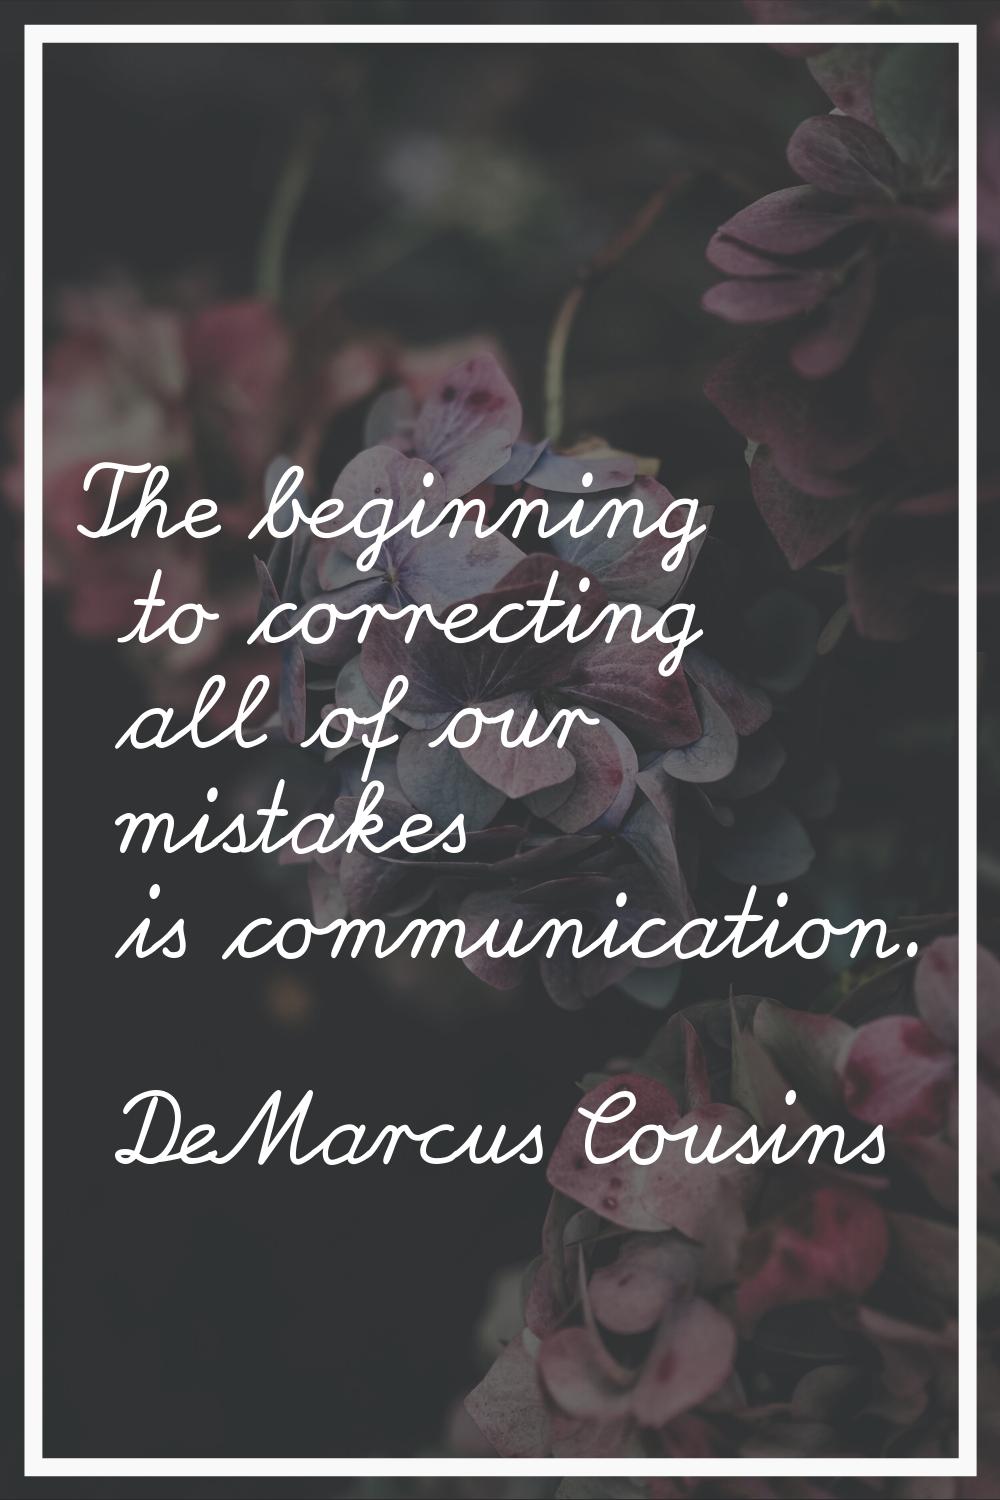 The beginning to correcting all of our mistakes is communication.